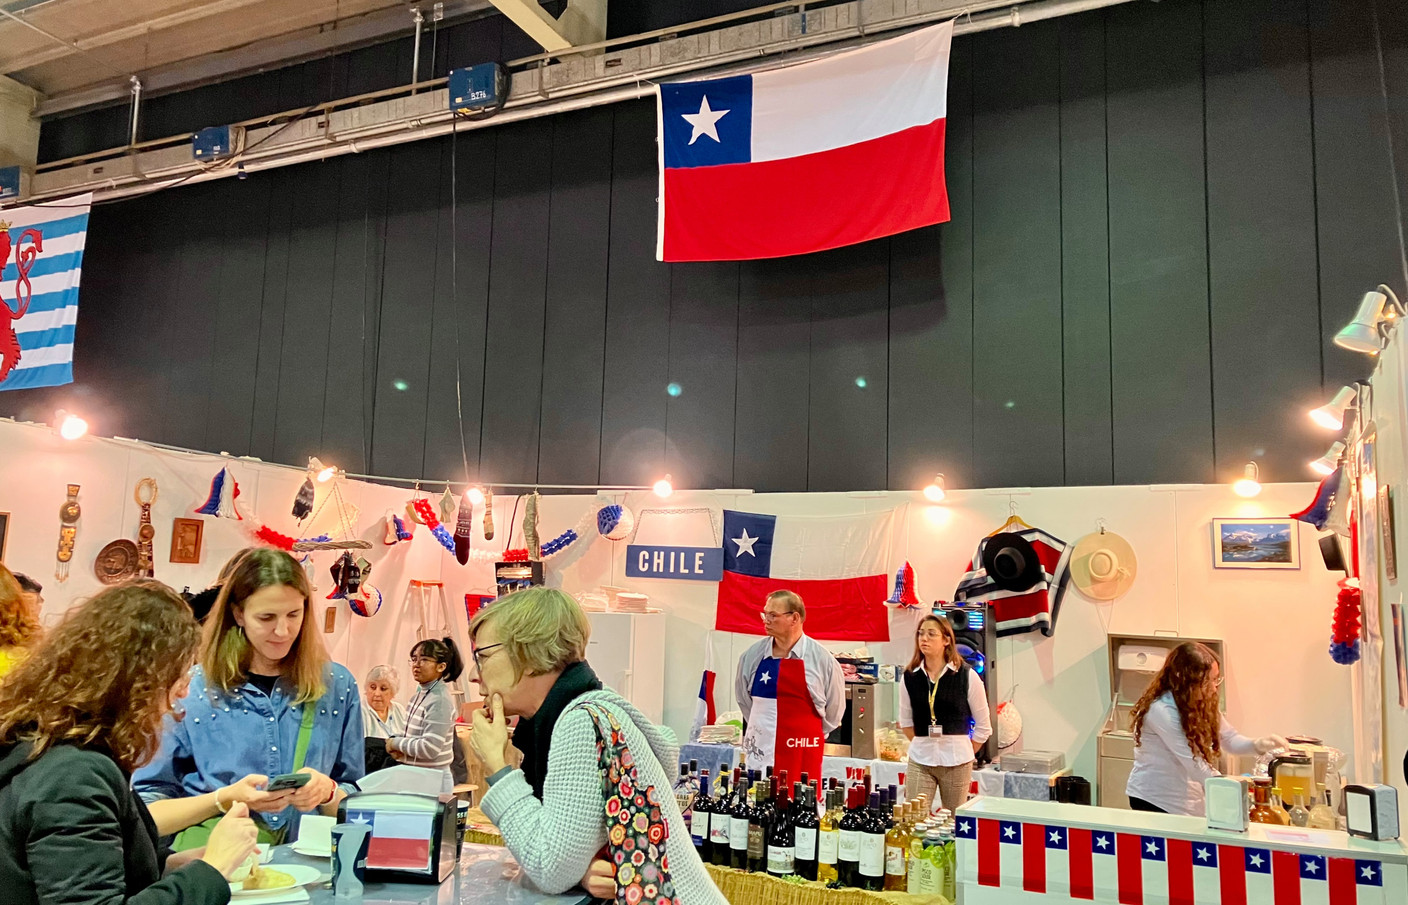 Wines from Chile were available at the country’s stand during the Bazar International. Photo: Lydia Linna/Maison Moderne